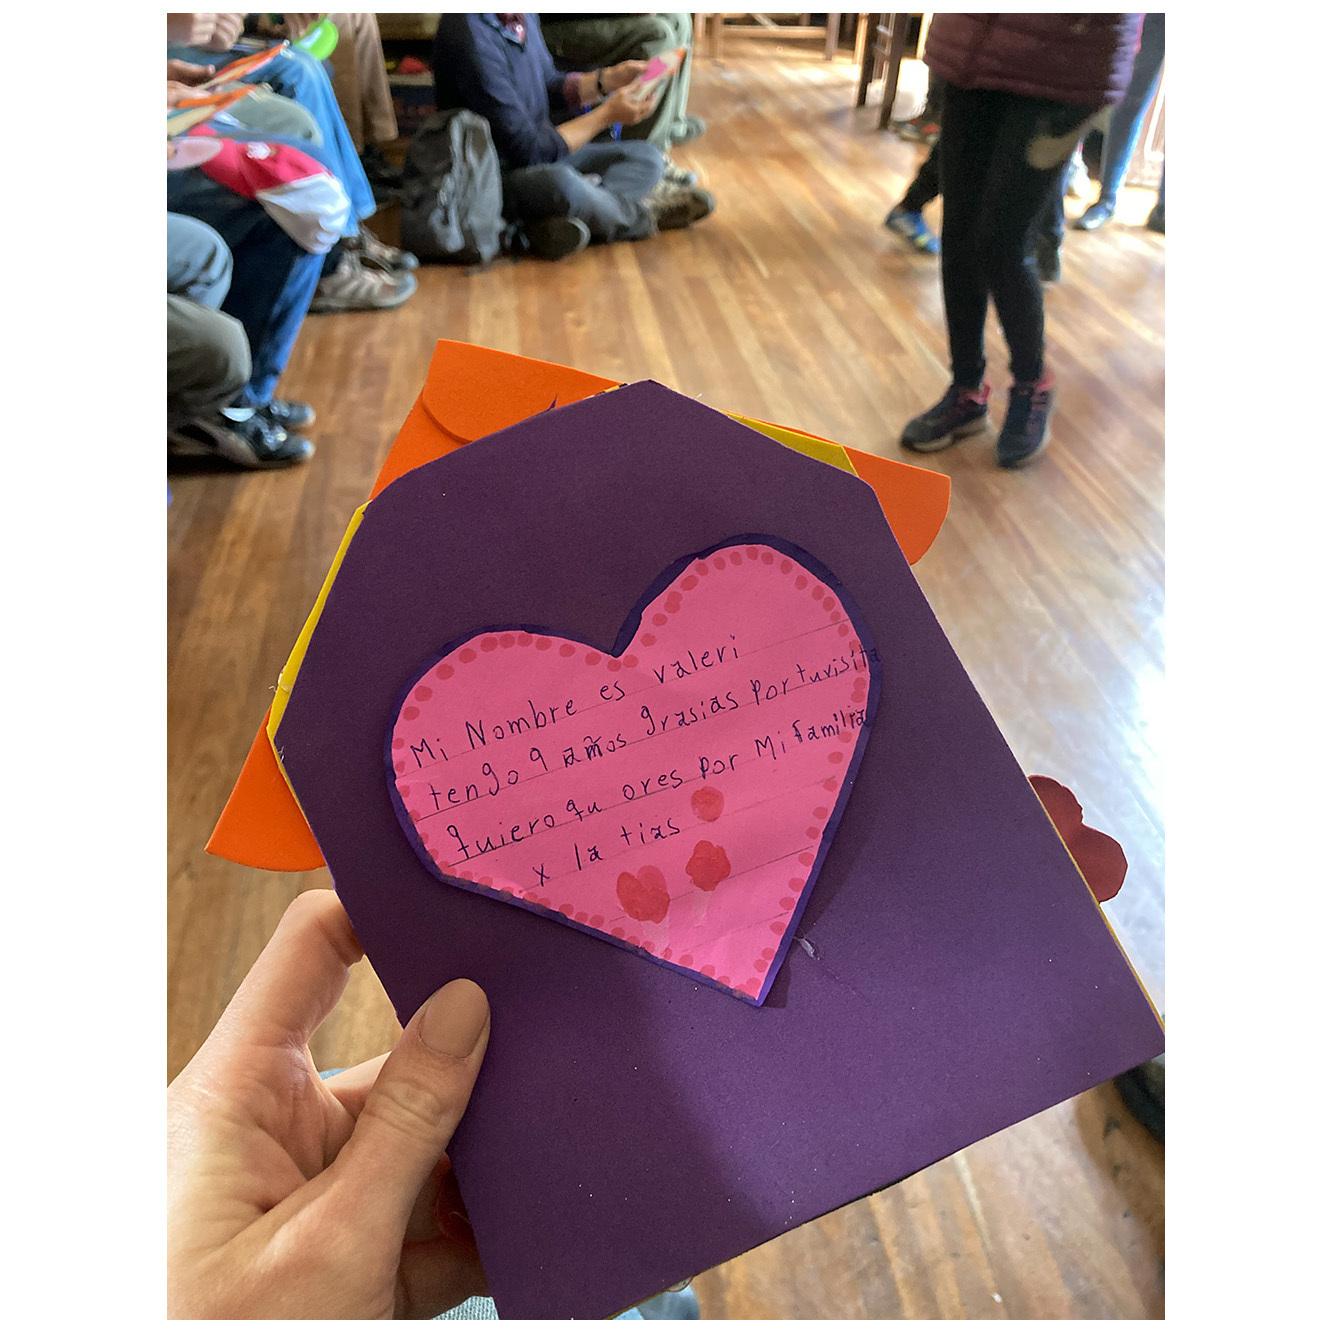 A homemade card with a pink heart and Spanish writing